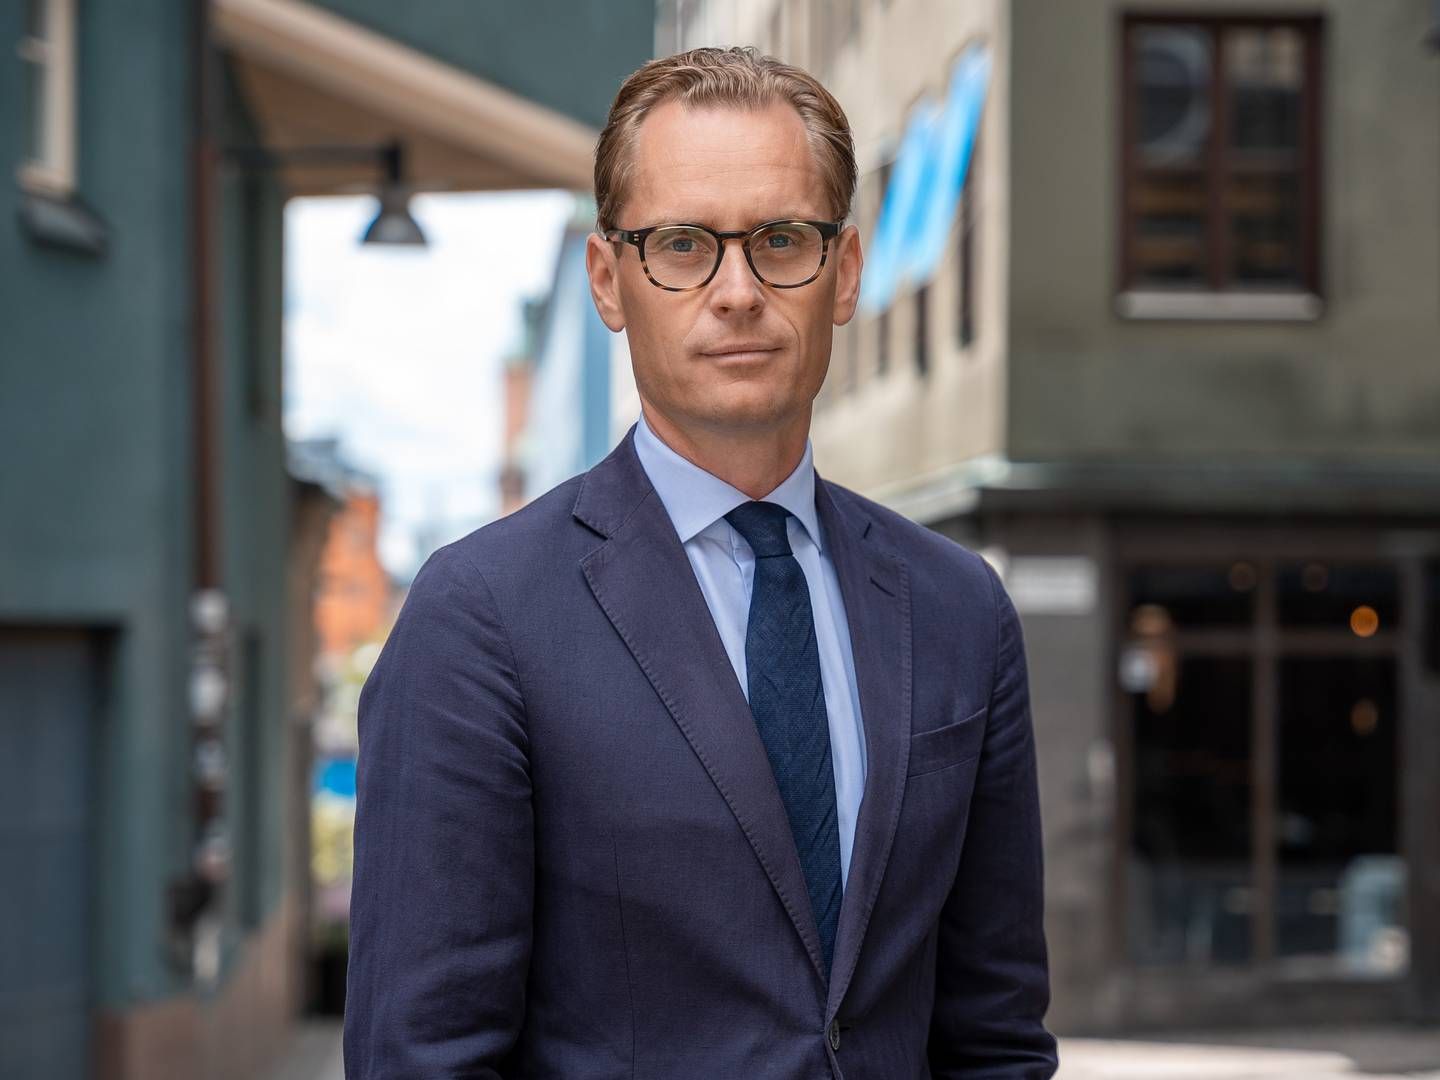 Ola Arvidsson switches to Coeli from rival Formue Sweden, where he has been deputy CEO and head of wealth management since 2021. | Photo: PR / Coeli